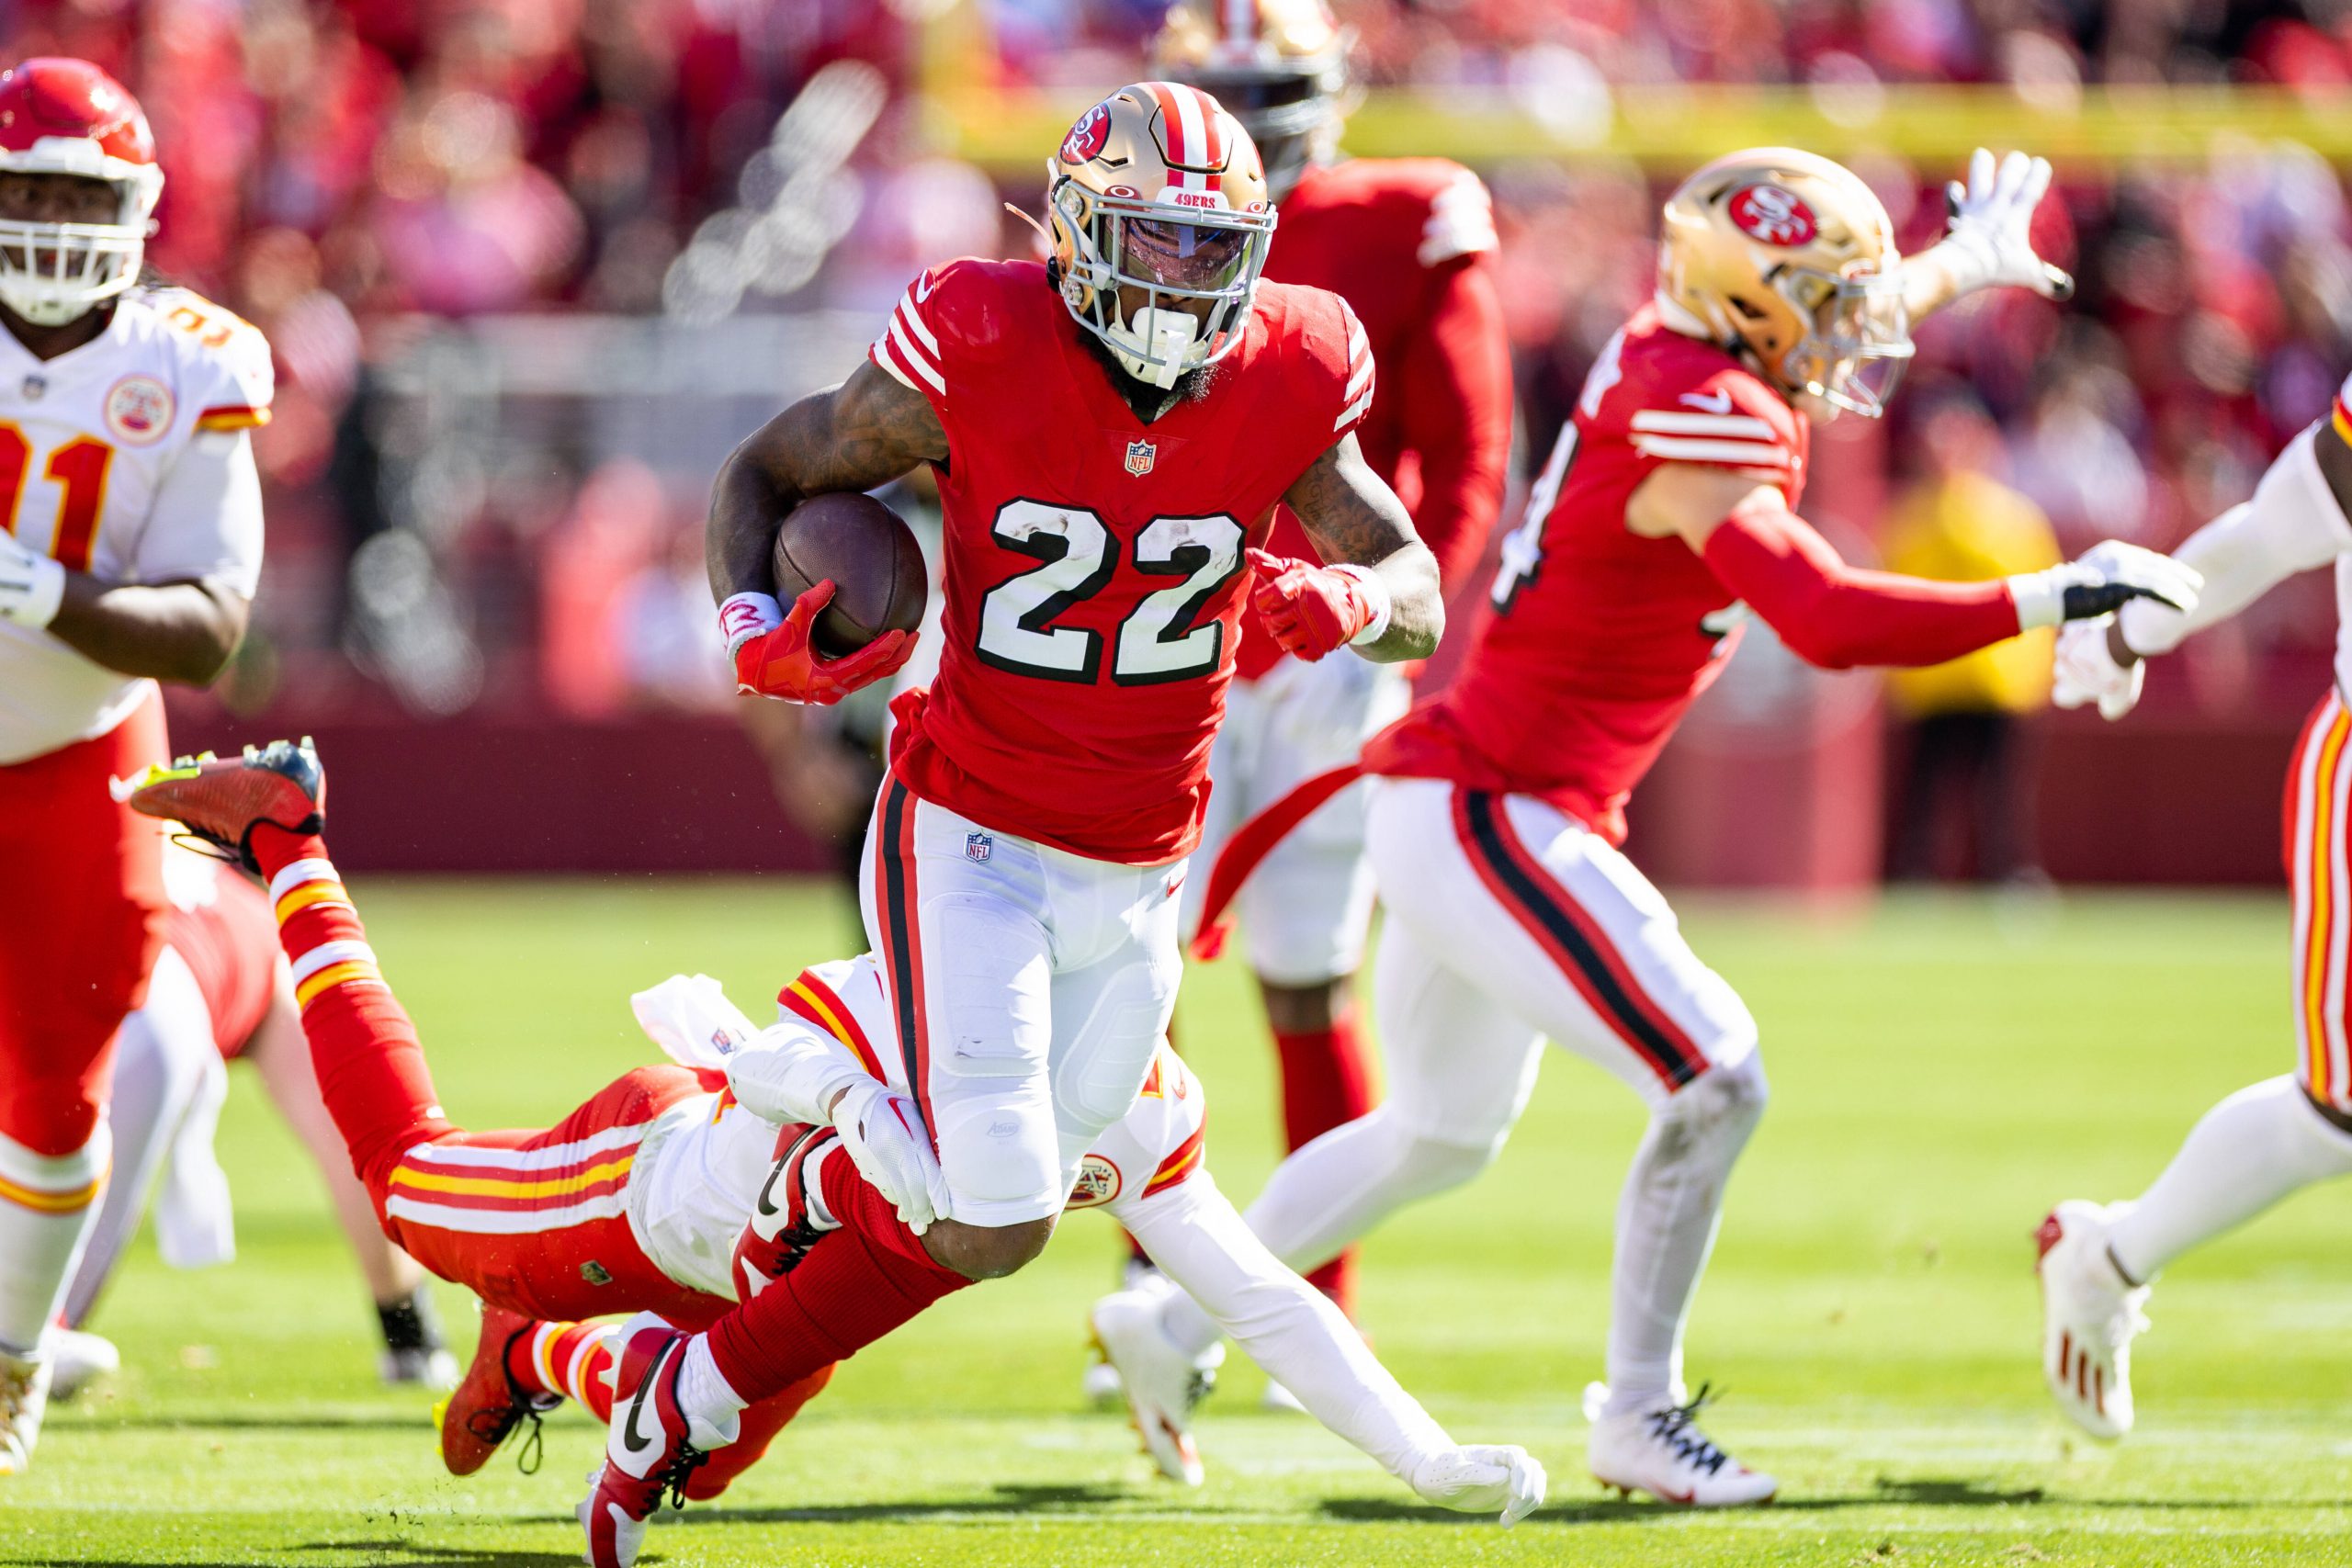 SANTA CLARA, CA - OCTOBER 23: San Francisco 49ers running back Jeff Wilson Jr. 22 runs the ball during the NFL, American Football Herren, USA professional football game between the Kansas City Chiefs and San Francisco 49ers on October 23, 2022 at Levis Stadium in Santa Clara, CA. Photo by Bob Kupbens/Icon Sportswire NFL: OCT 23 Chiefs at 49ers Icon22102311